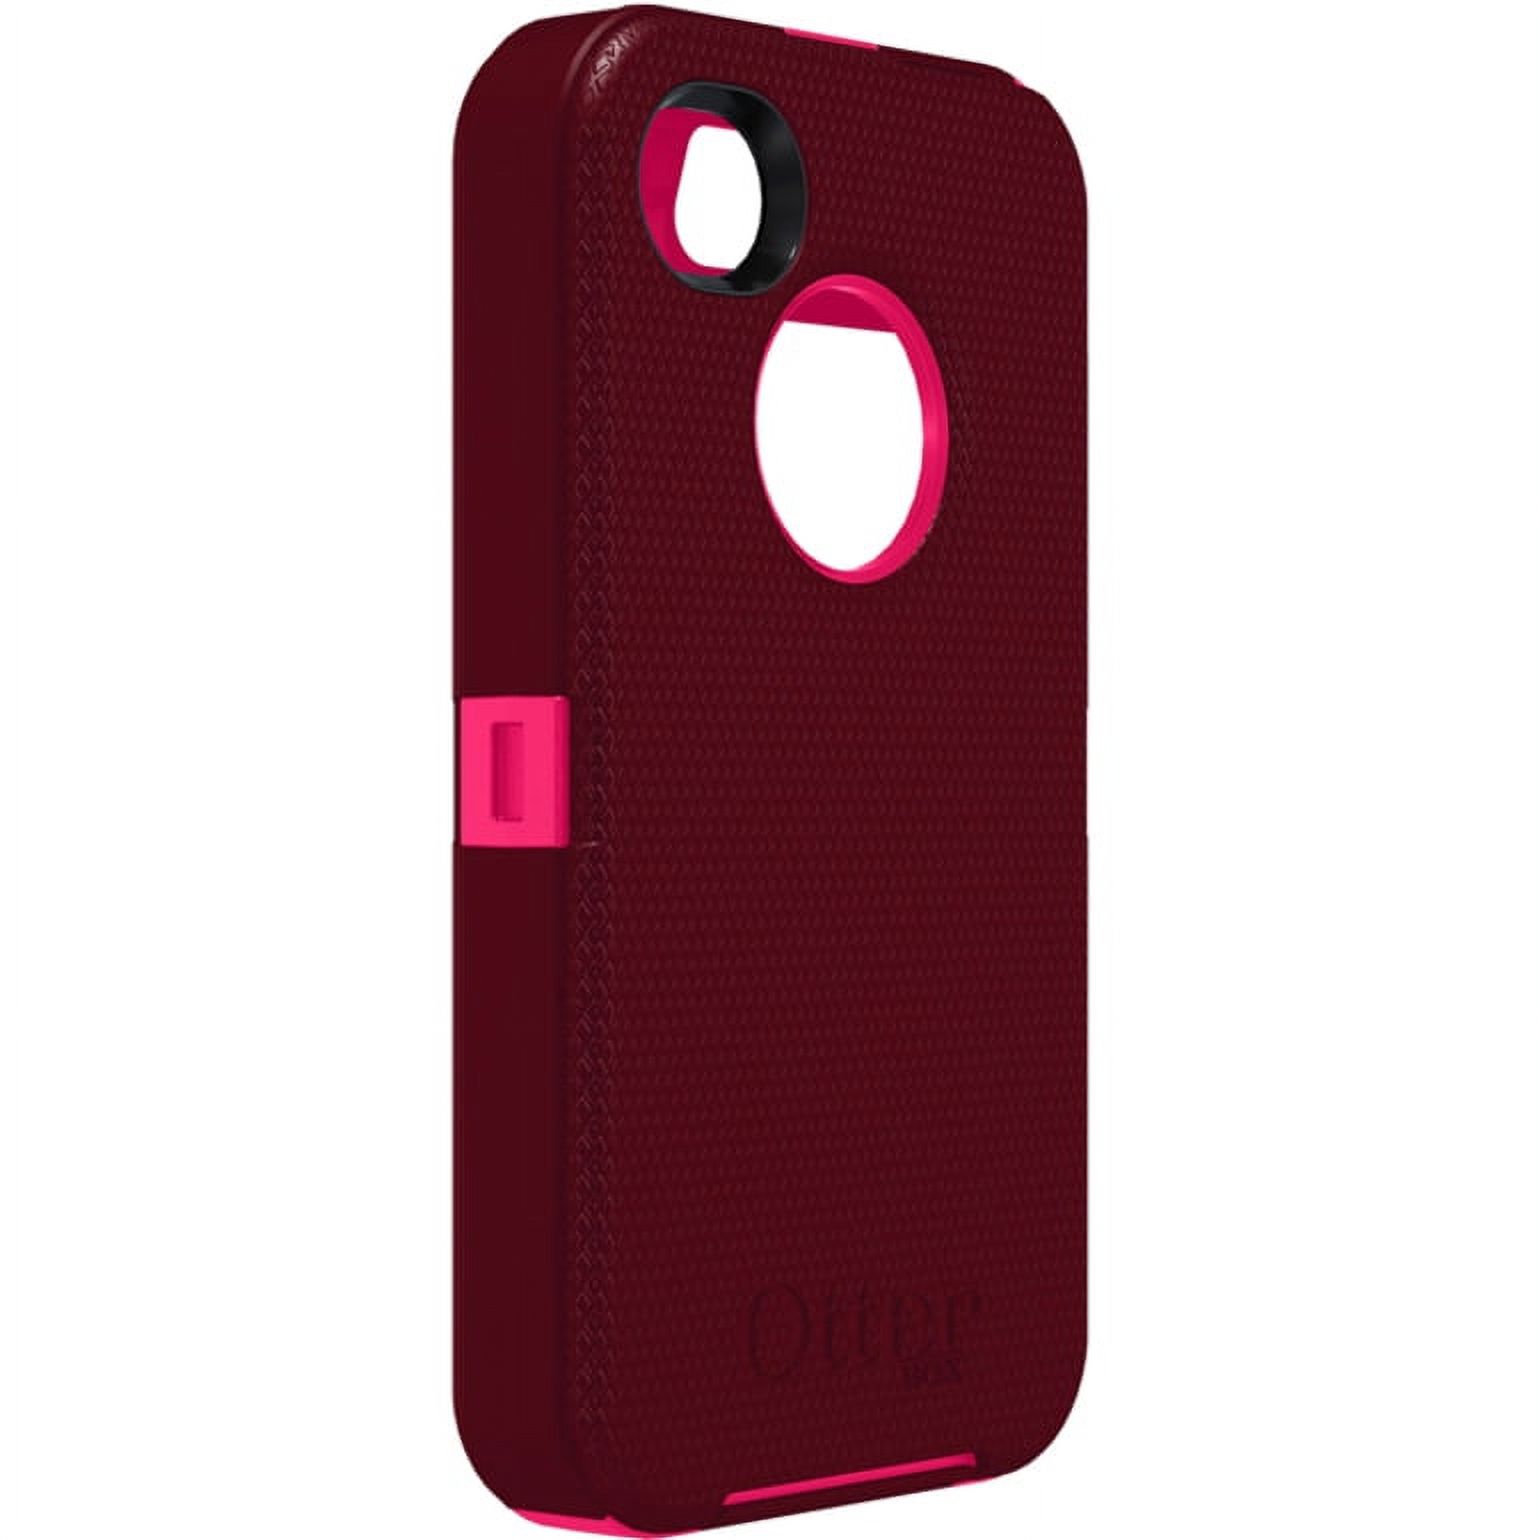 OtterBox Defender Rugged Carrying Case (Holster) Apple iPhone 4S, iPhone 4 Smartphone, Deep Plum, Peony Pink - image 5 of 5